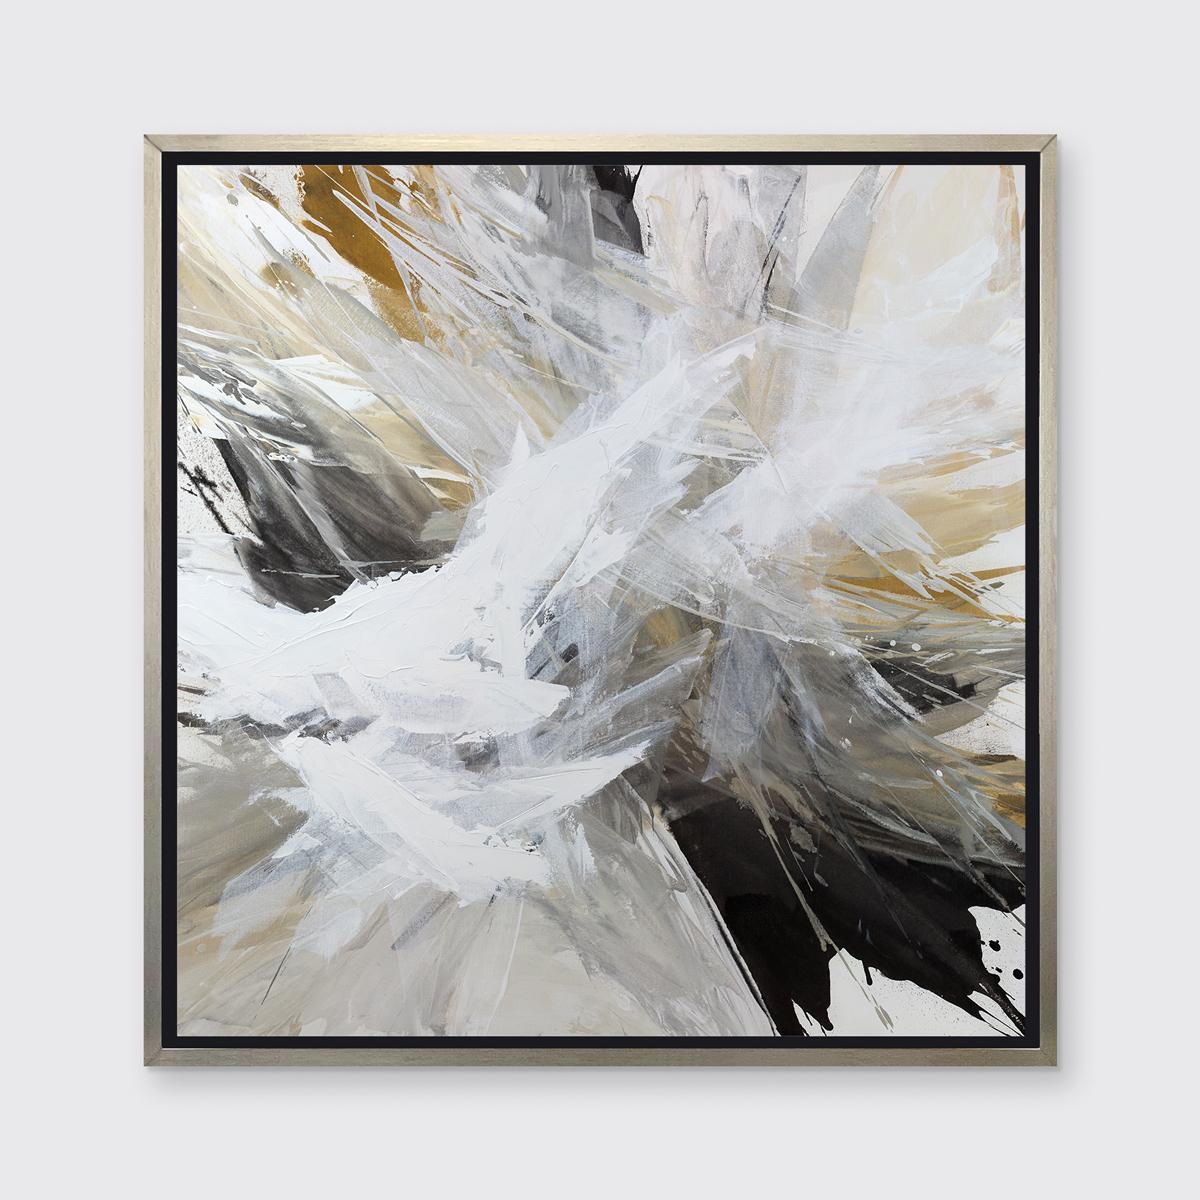 Teodora Guererra Abstract Print - "Today I Choose Palette Knives, " Framed Limited Edition Giclee Print, 24" x 24"